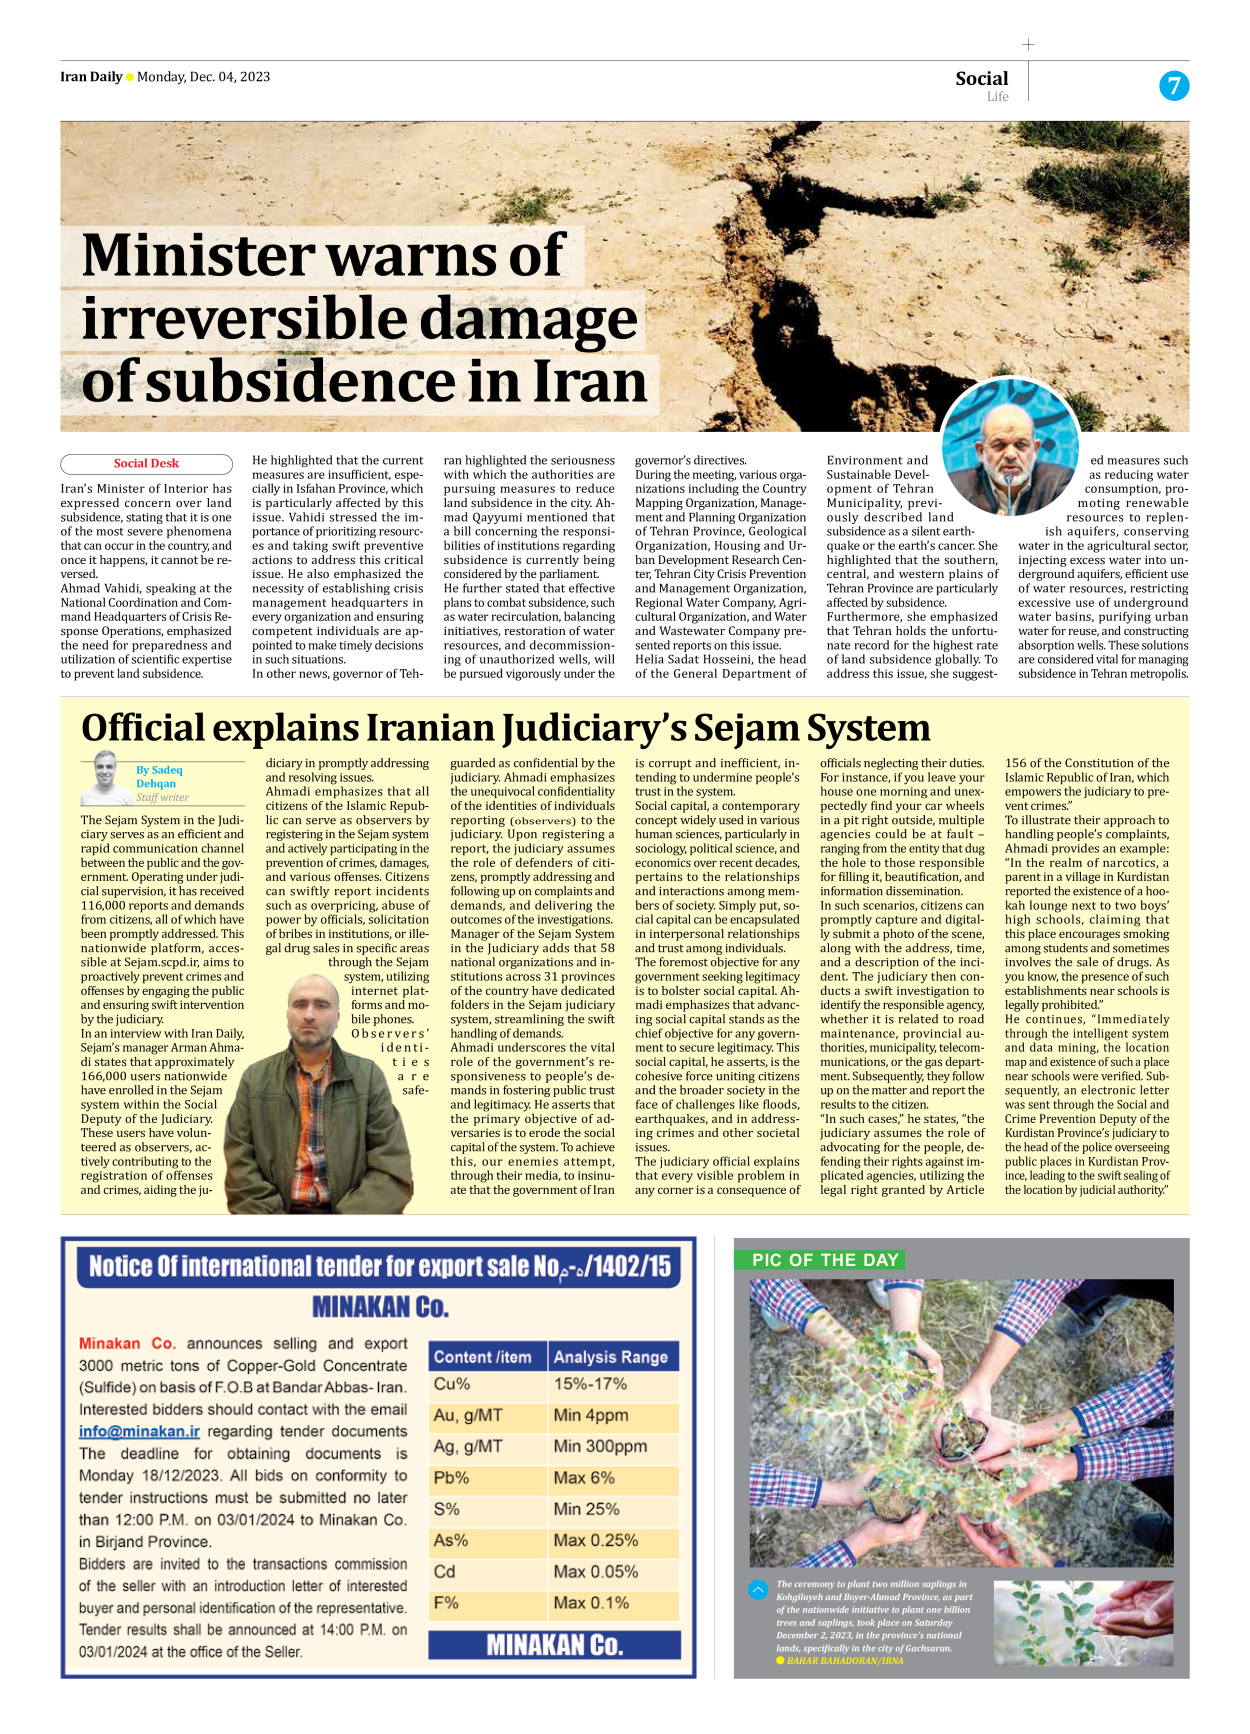 Iran Daily - Number Seven Thousand Four Hundred and Fifty One - 04 December 2023 - Page 7